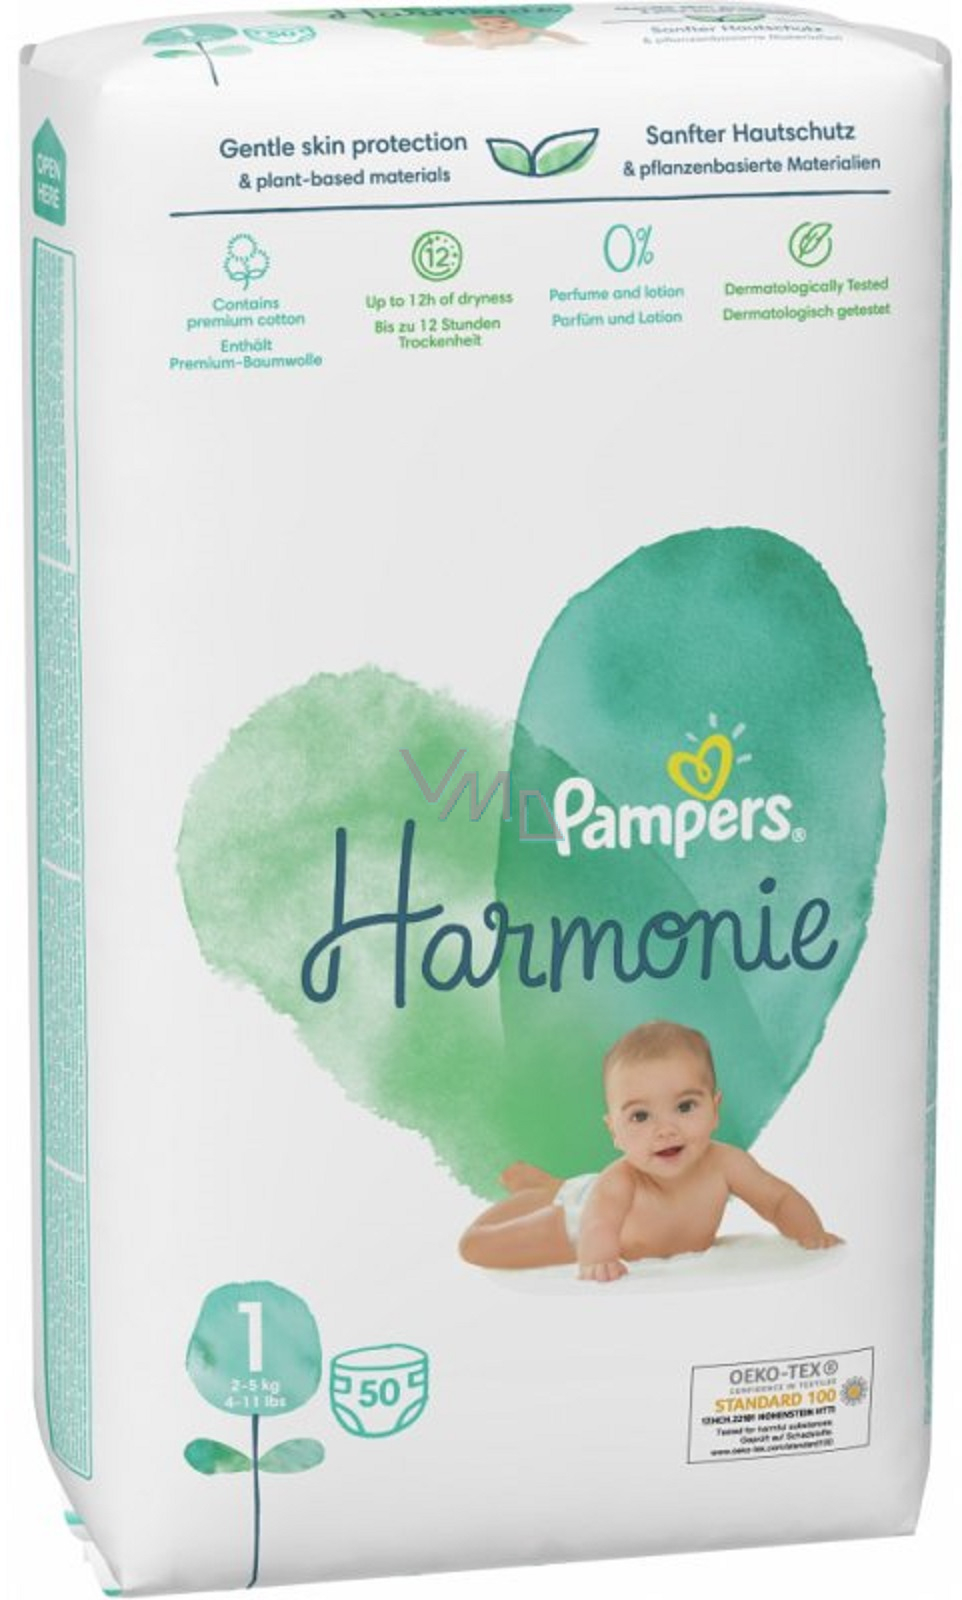 Pampers Premium Protection taille 6 maxi pack 66 couches